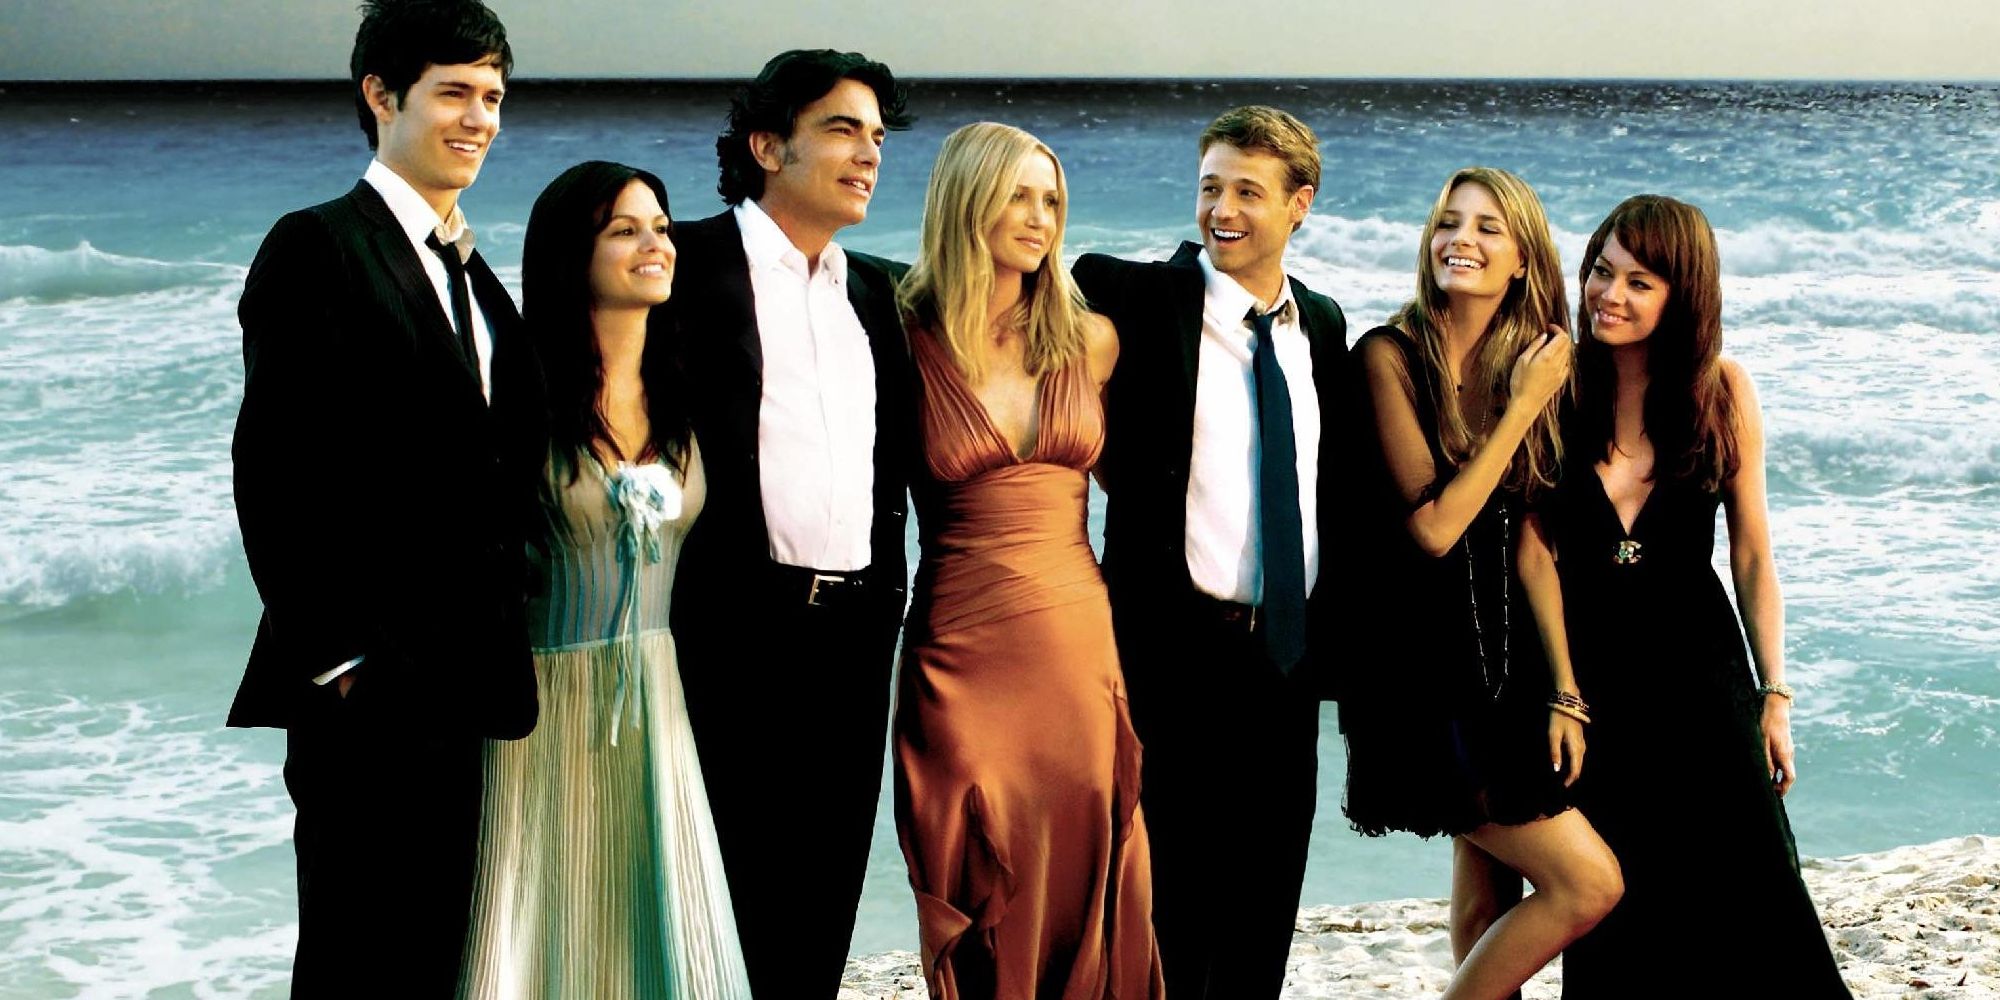 The O.C. Cast dressed fancy by the sea.